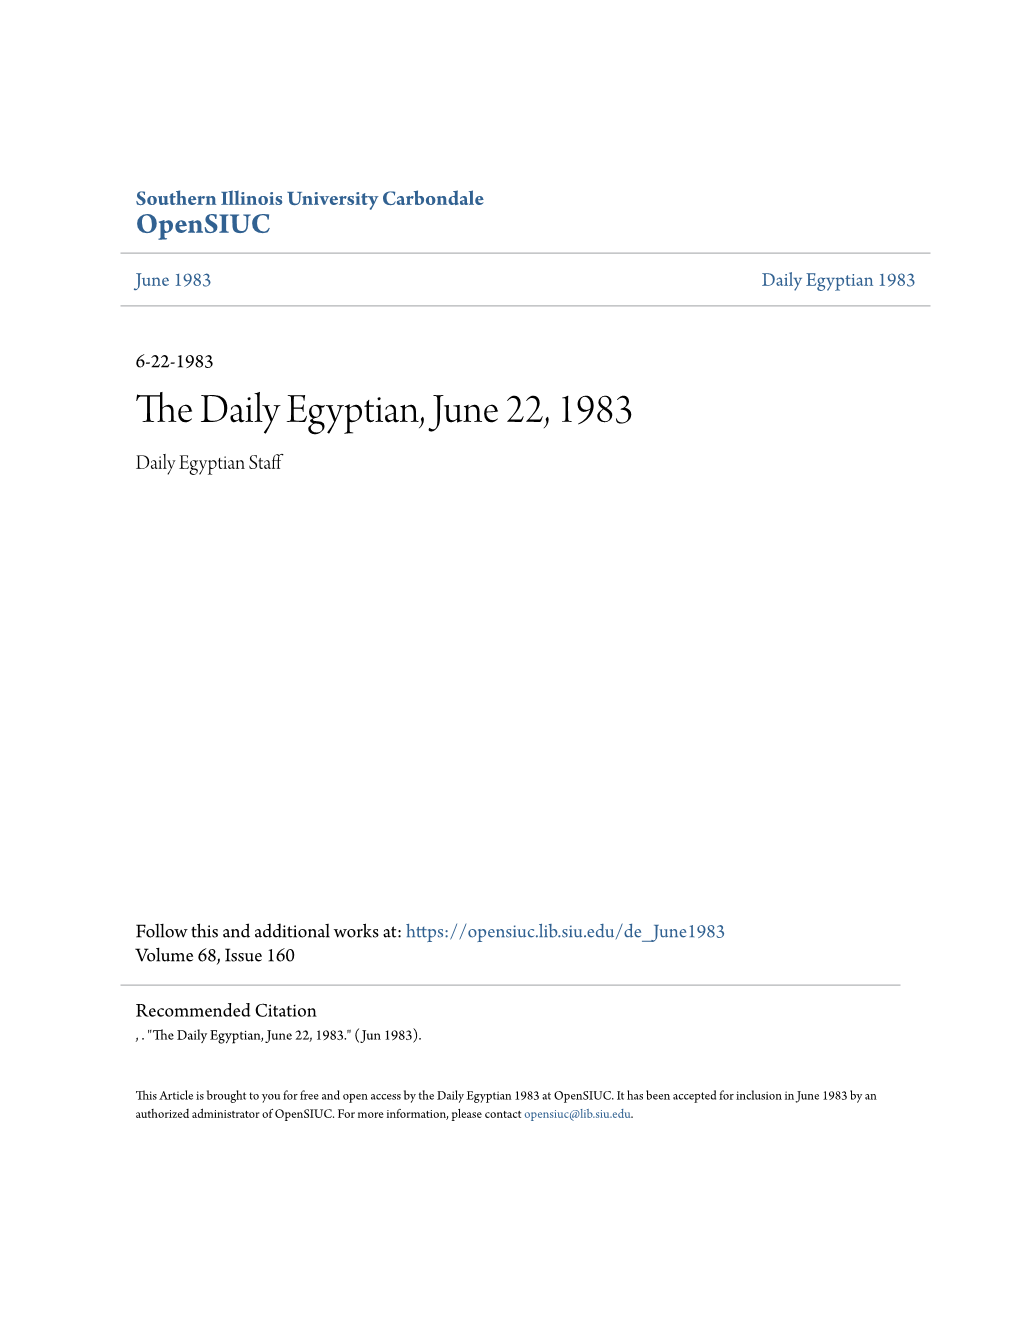 The Daily Egyptian, June 22, 1983